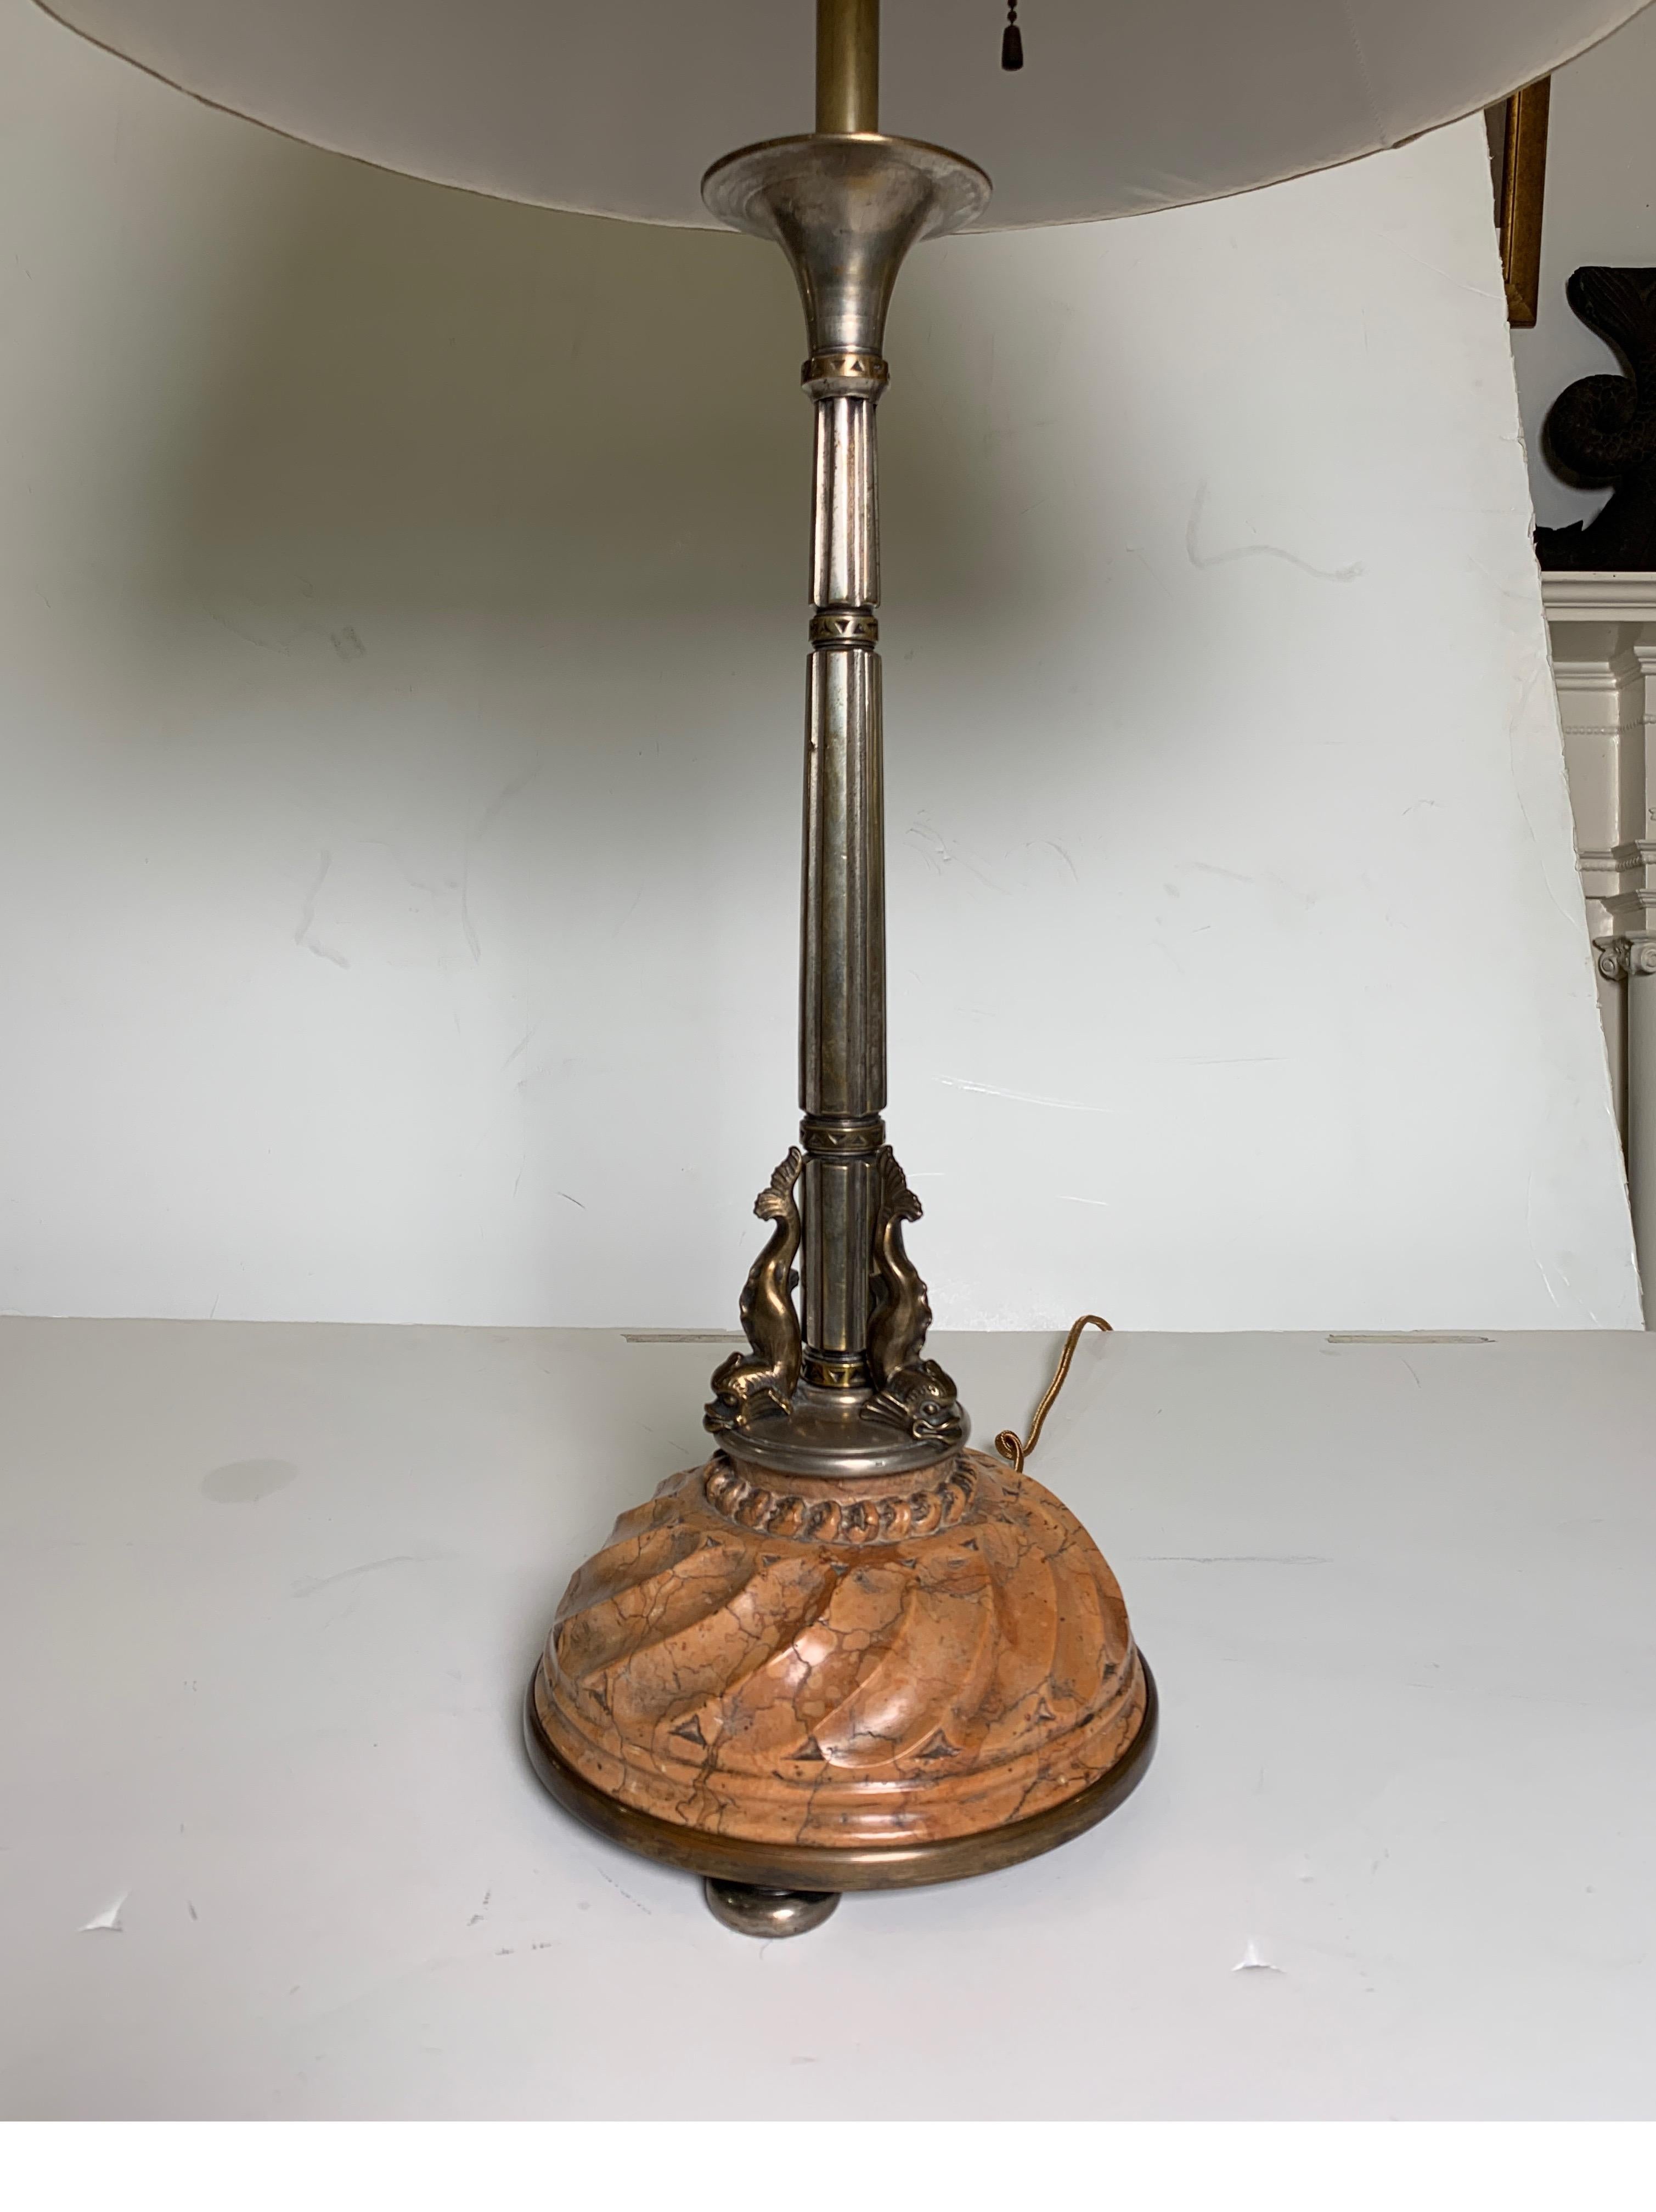 Oscar Bach circa 1920s silvered bronze table lamp with carved Italian marble base
Nice original condition with dolphin figures mounted at base, great carving in marble base.
Dimensions: 35